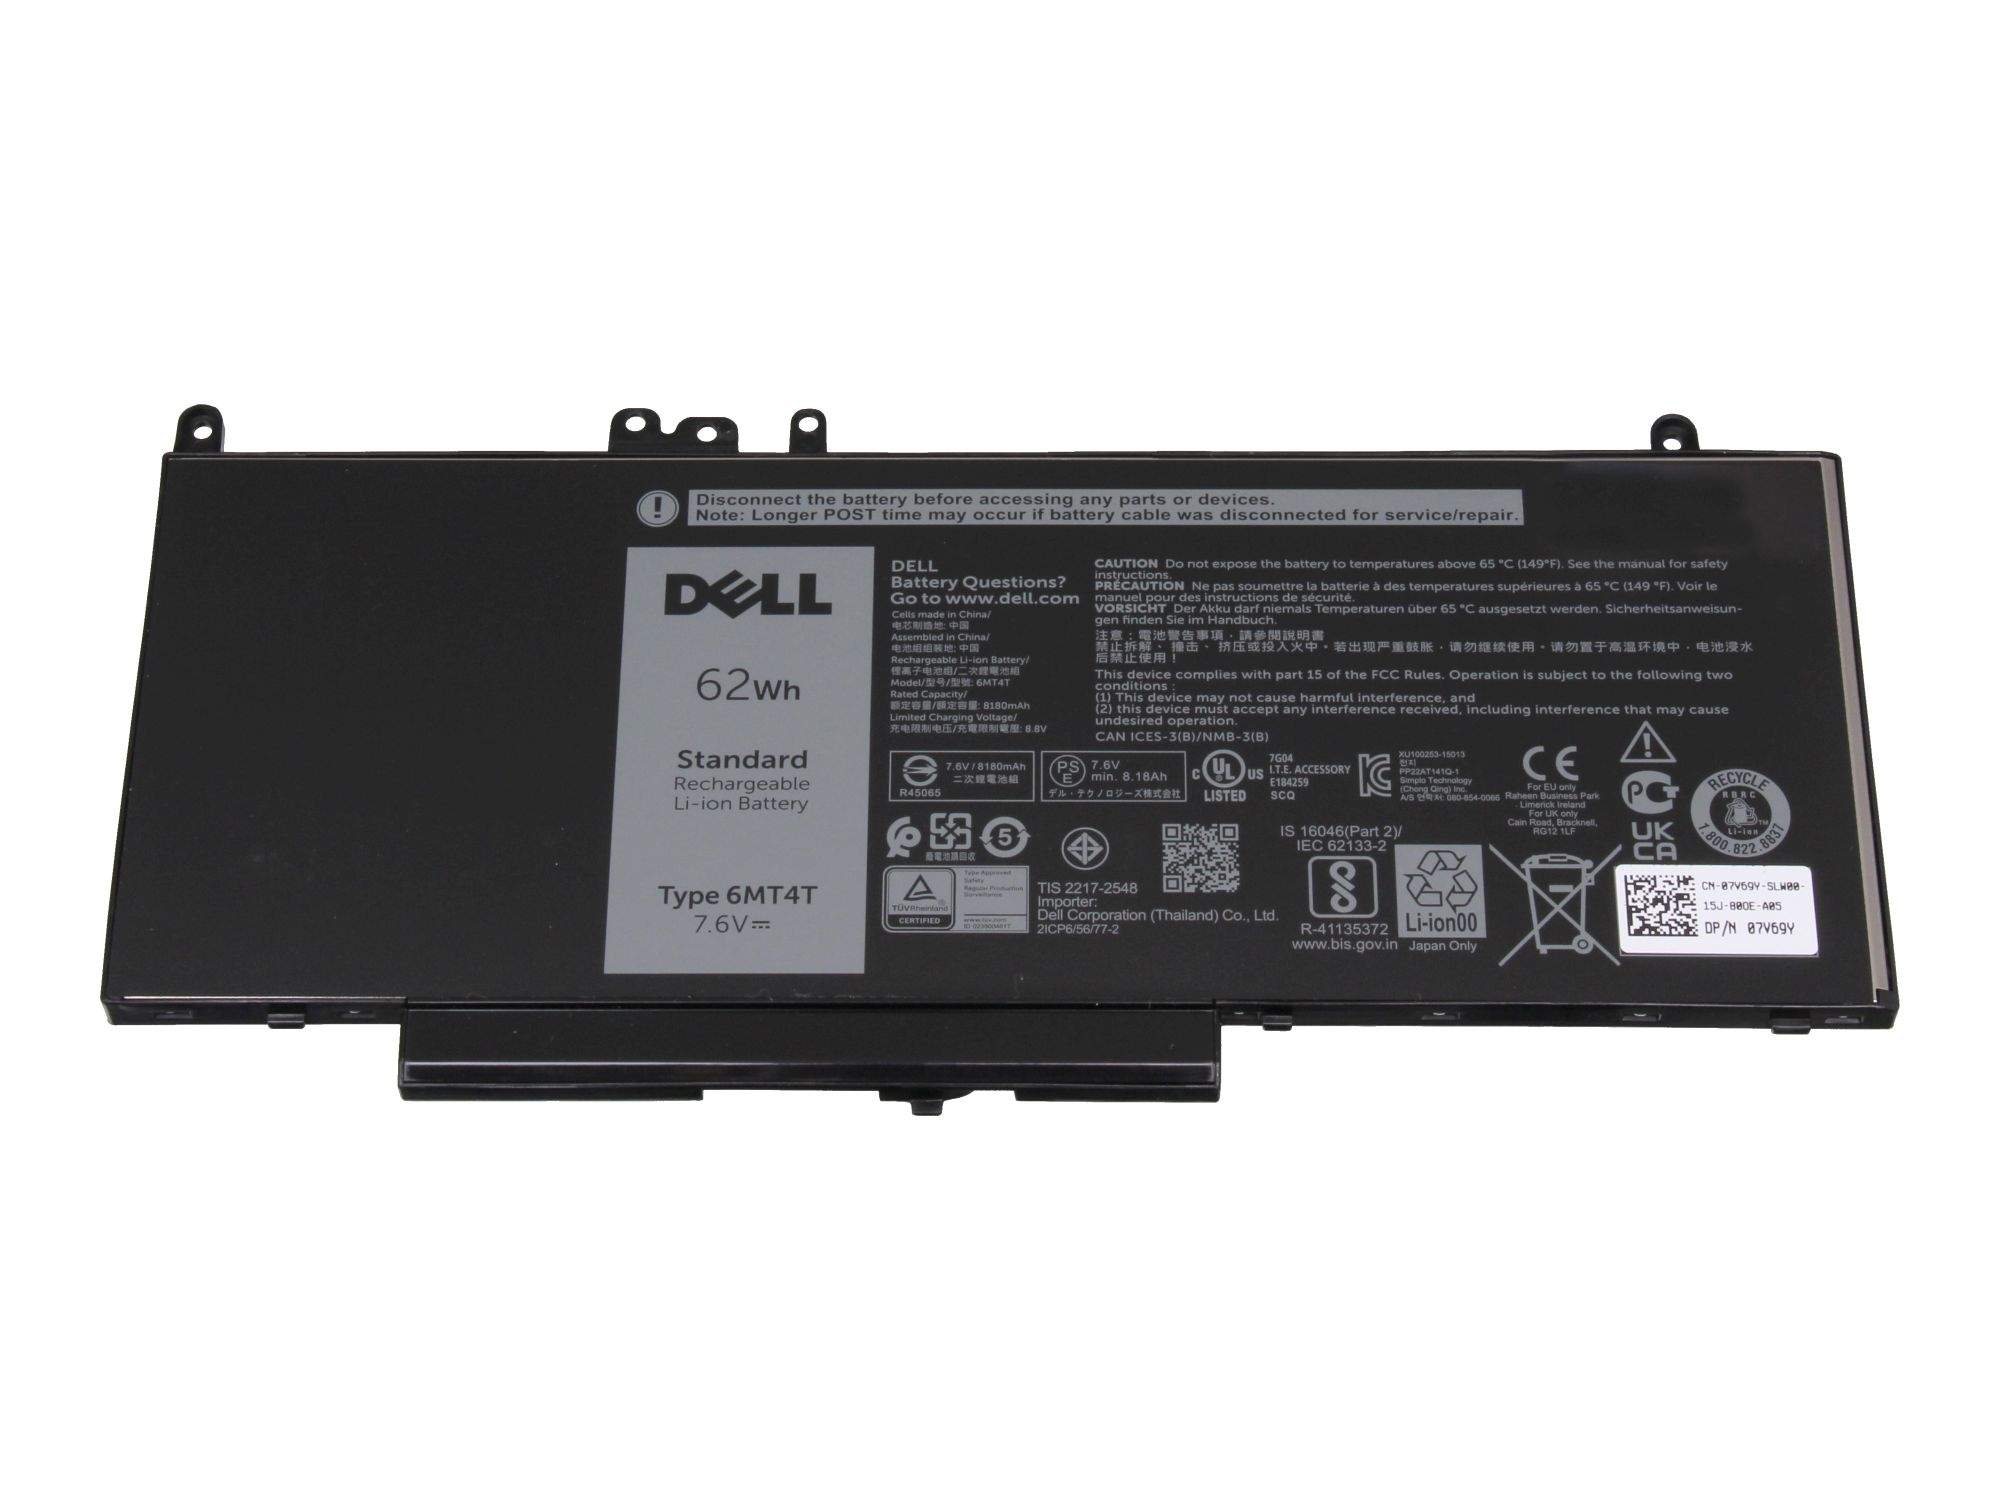 DELL 62WHr 4-Cell Battery, Customer Install